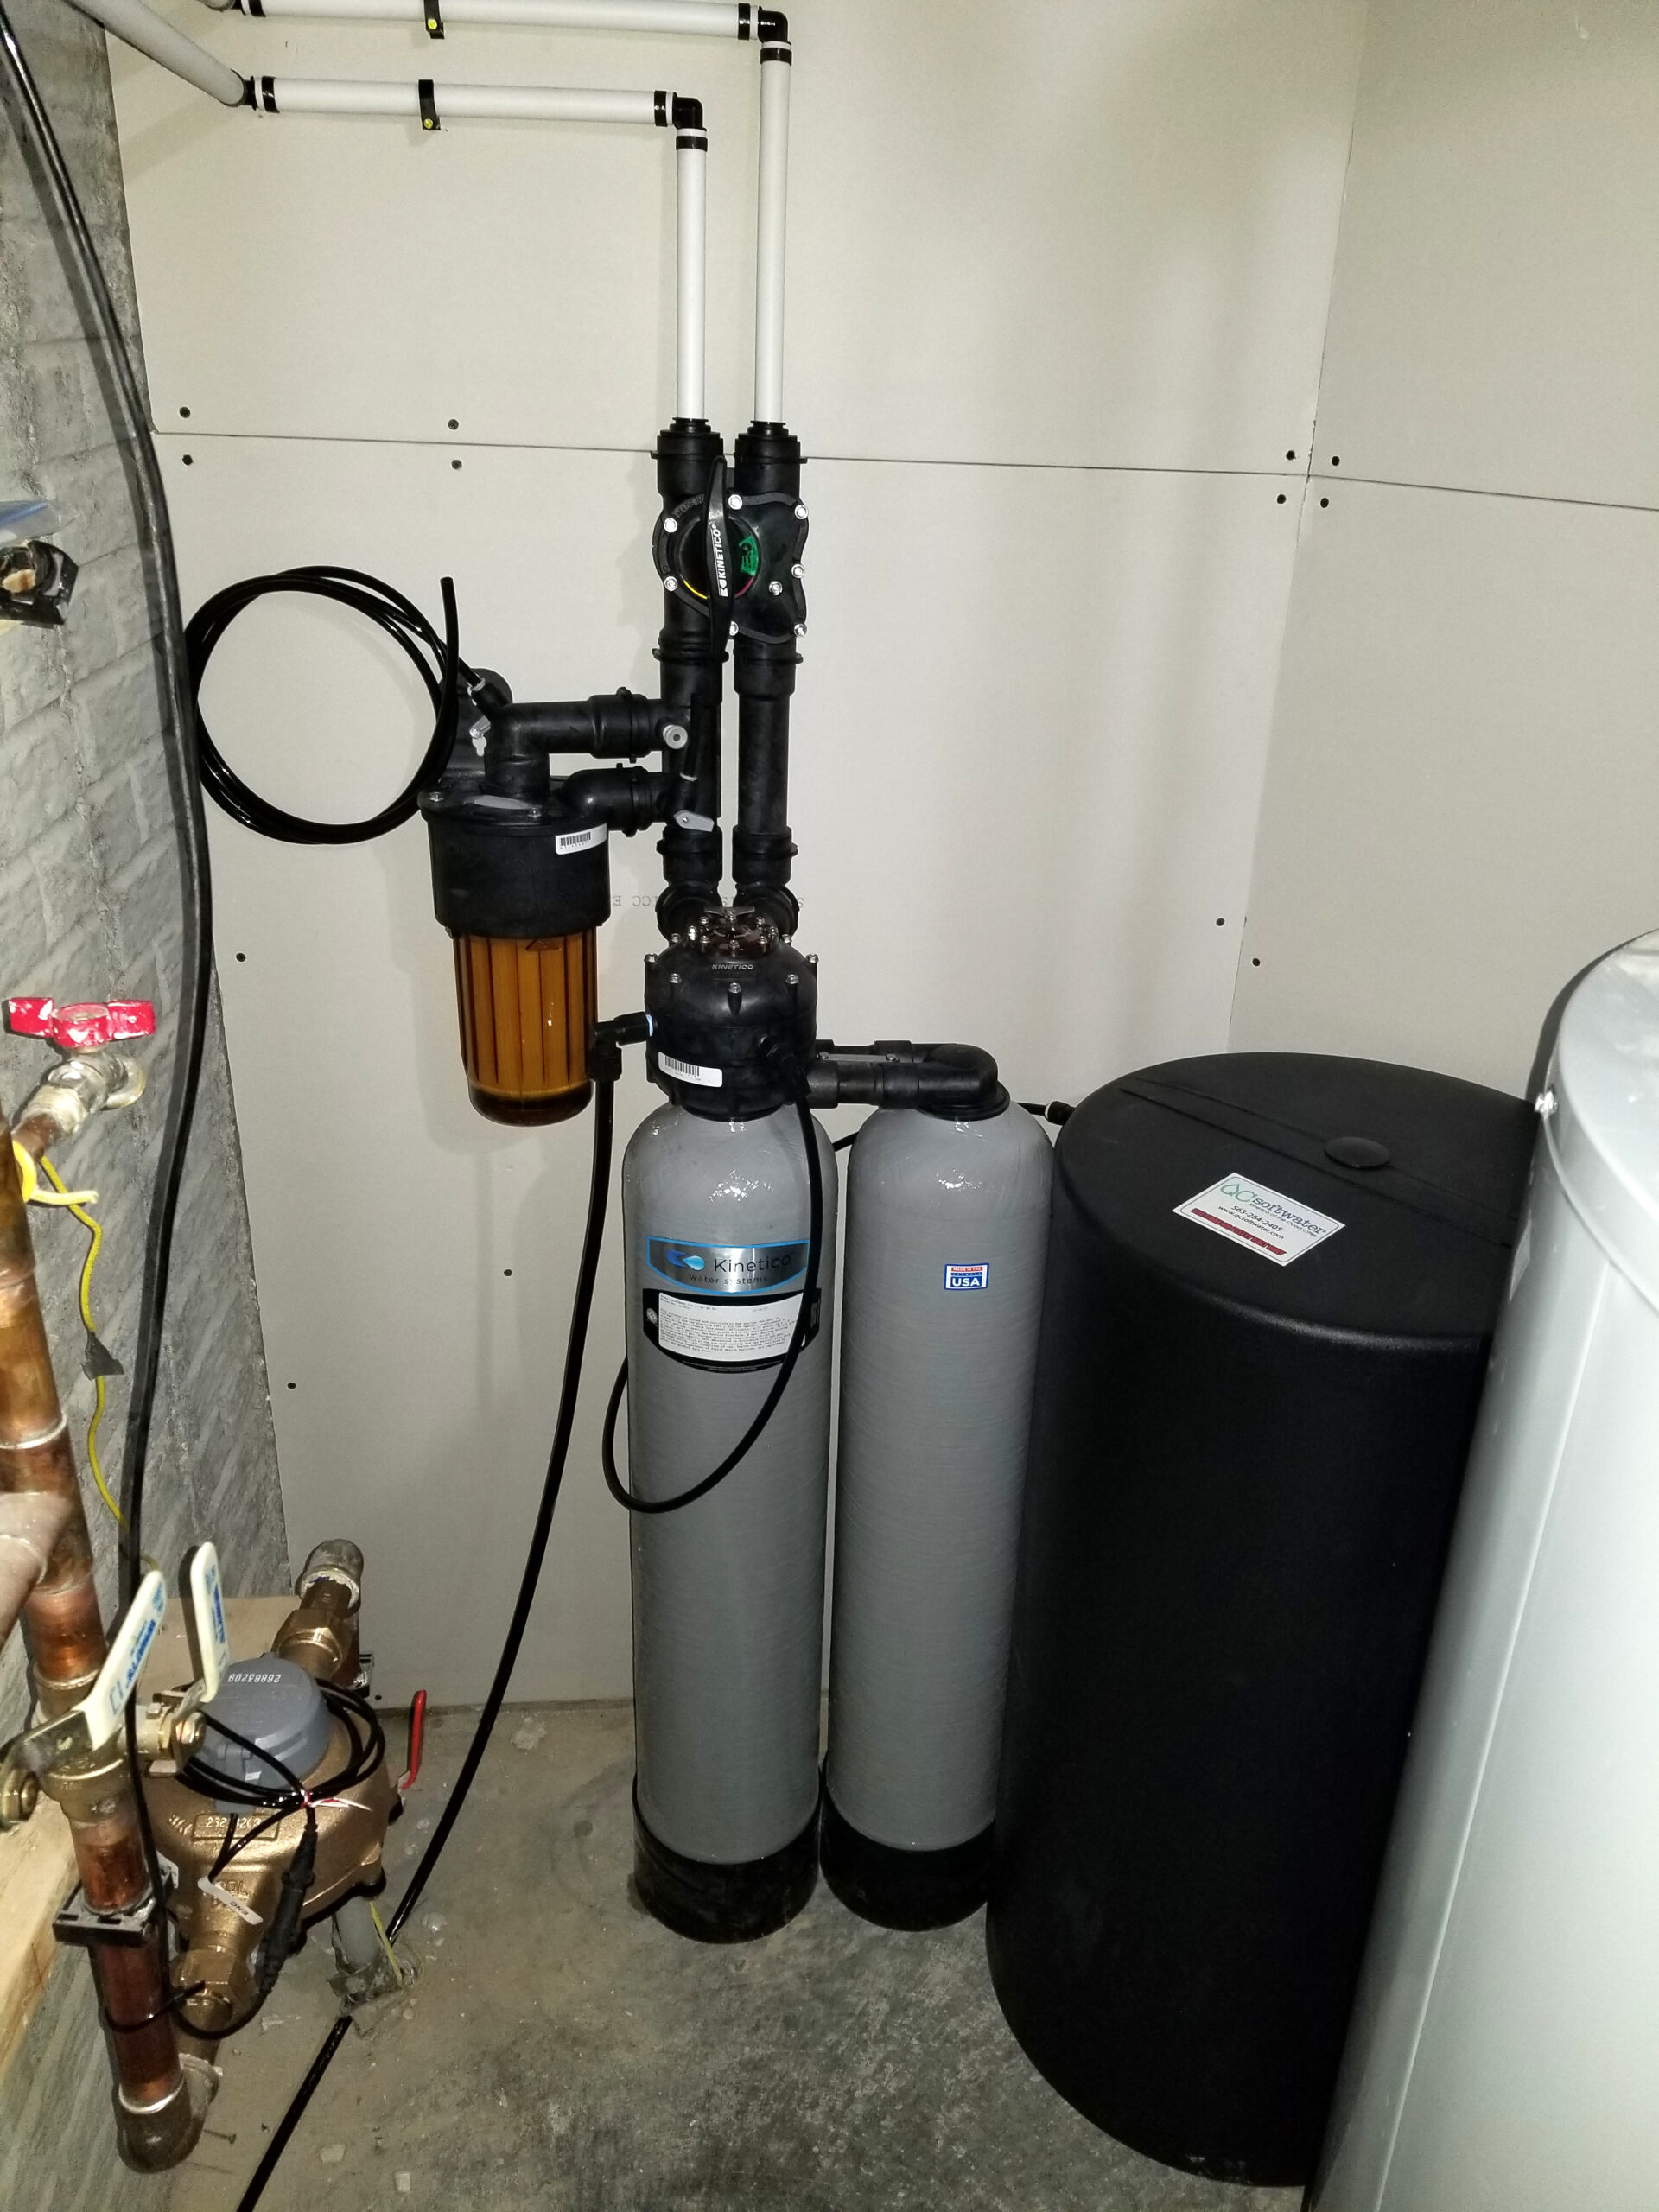 Customer in Bettendorf will be starting off the new year right with soft water provided by QC Soft Water and Kinetico